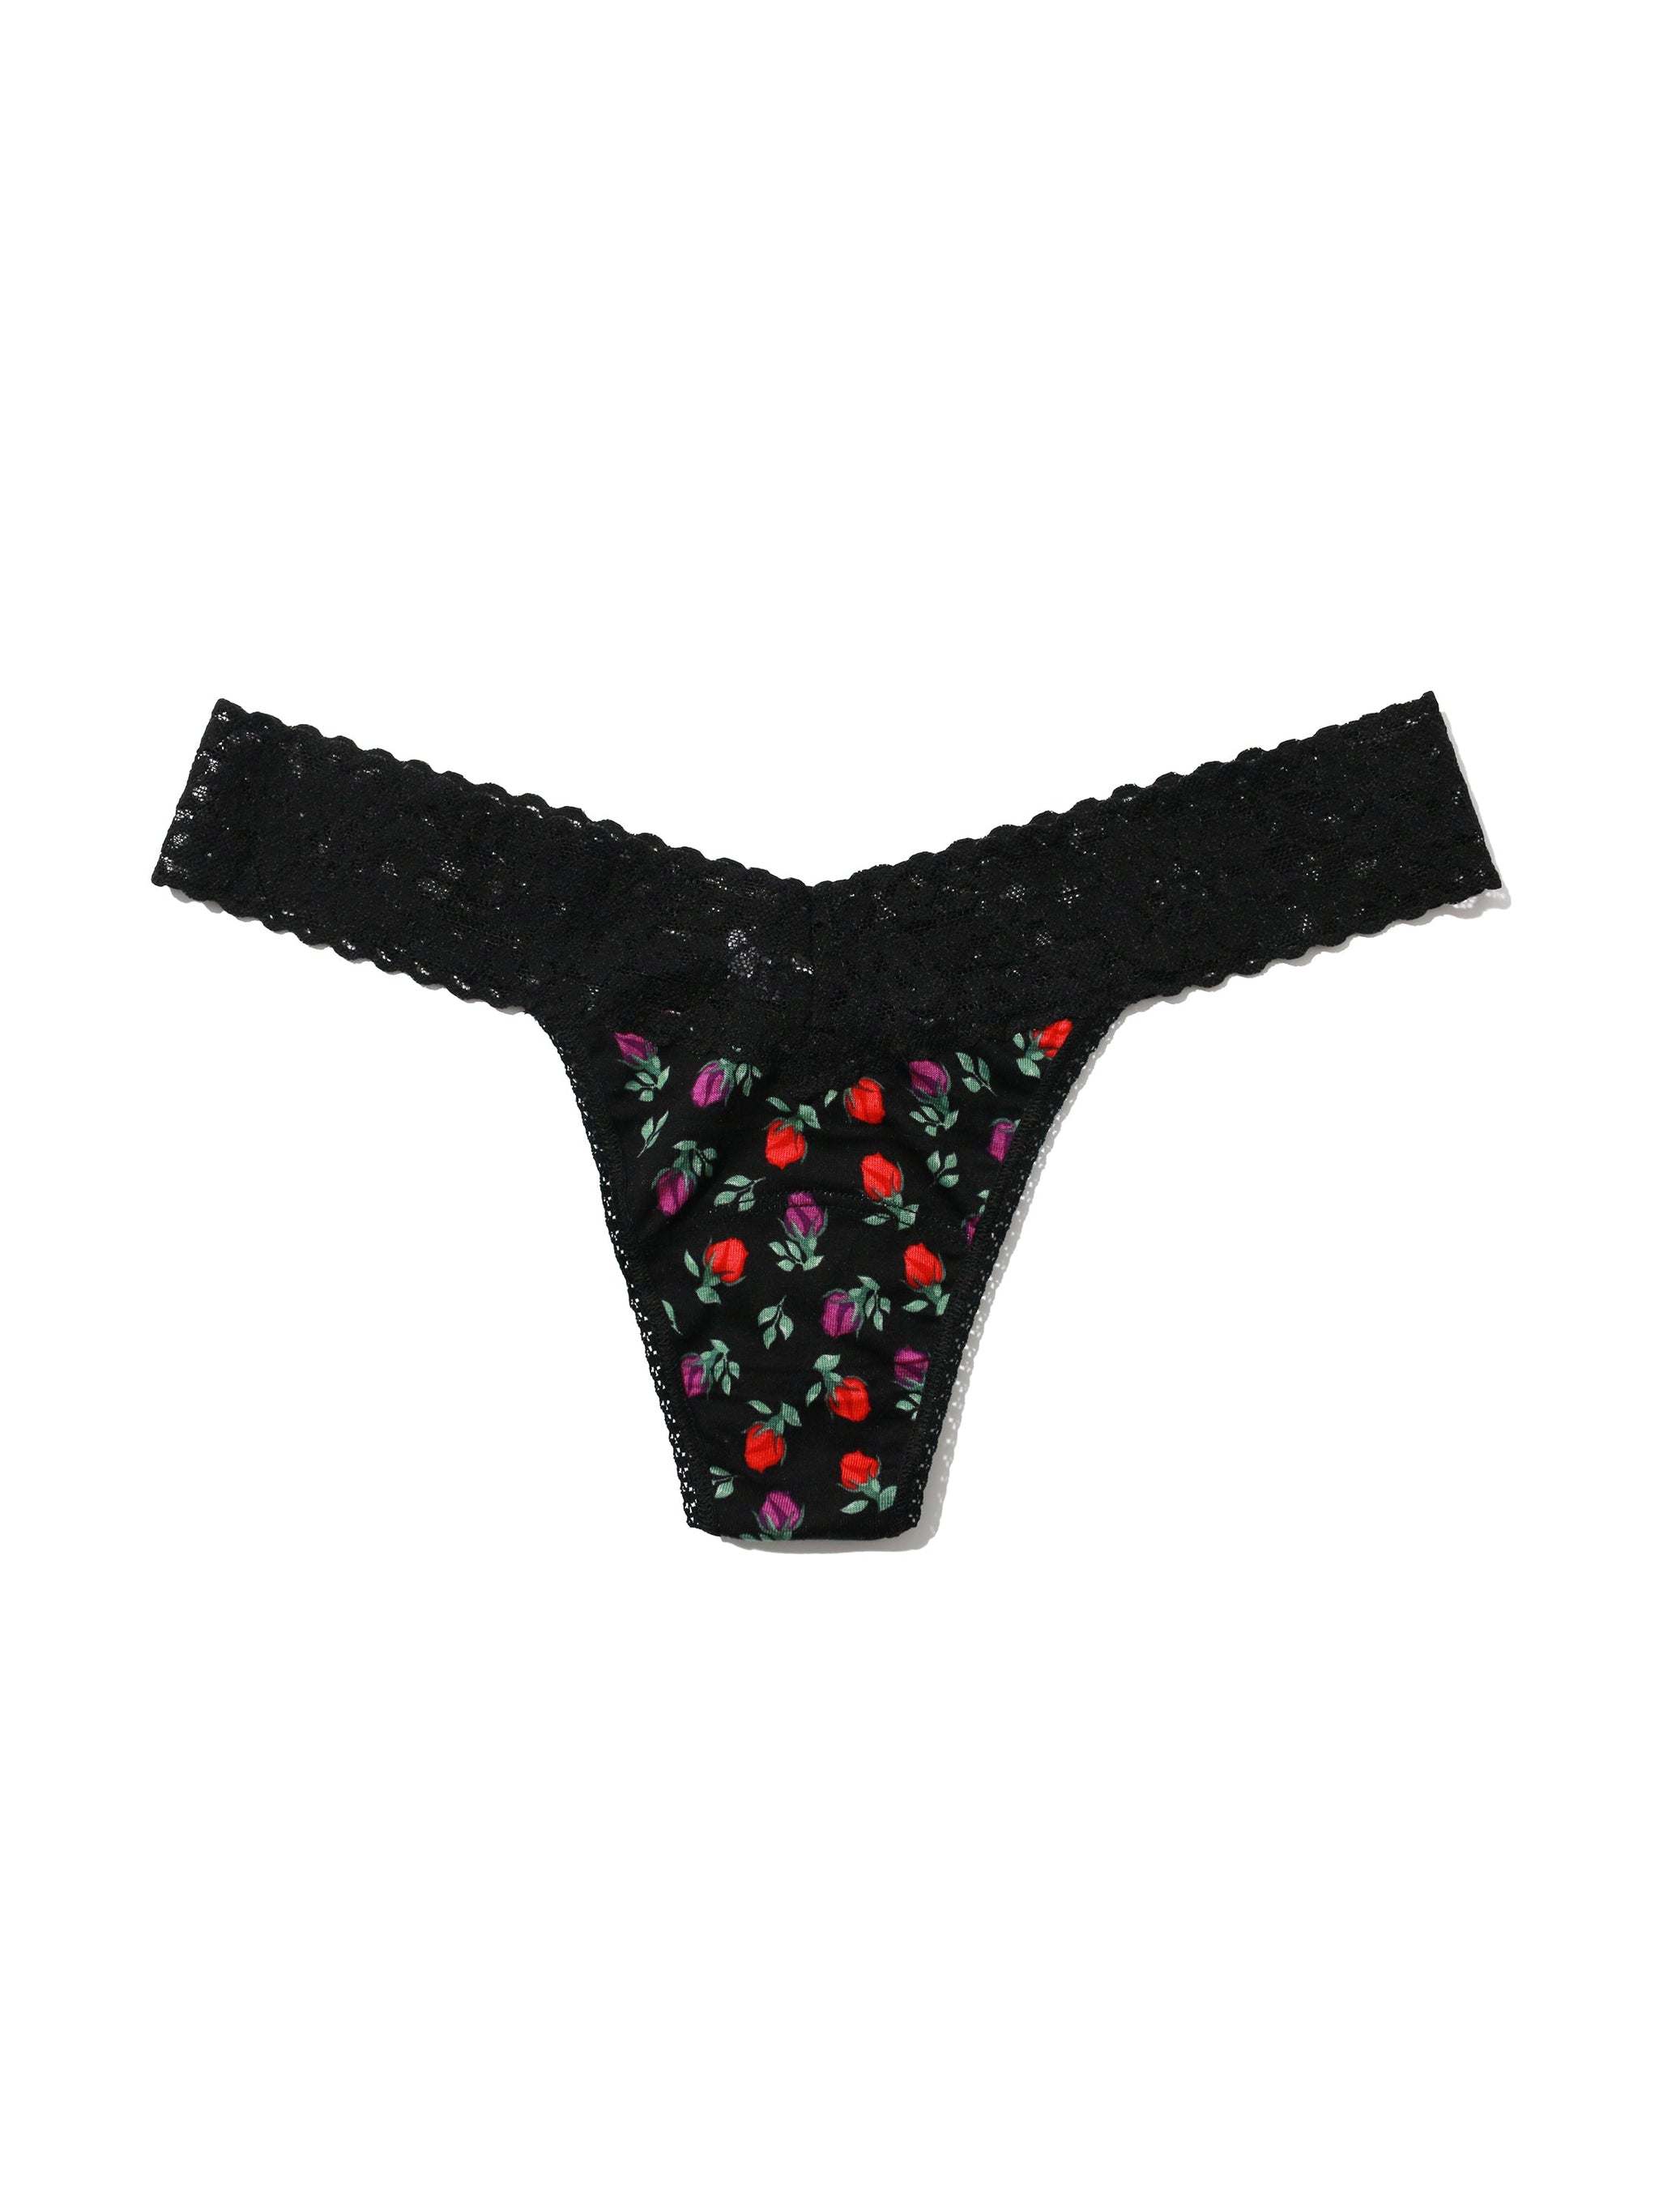 Matching Underwear for Couples, Donut Design, Mix and Match From